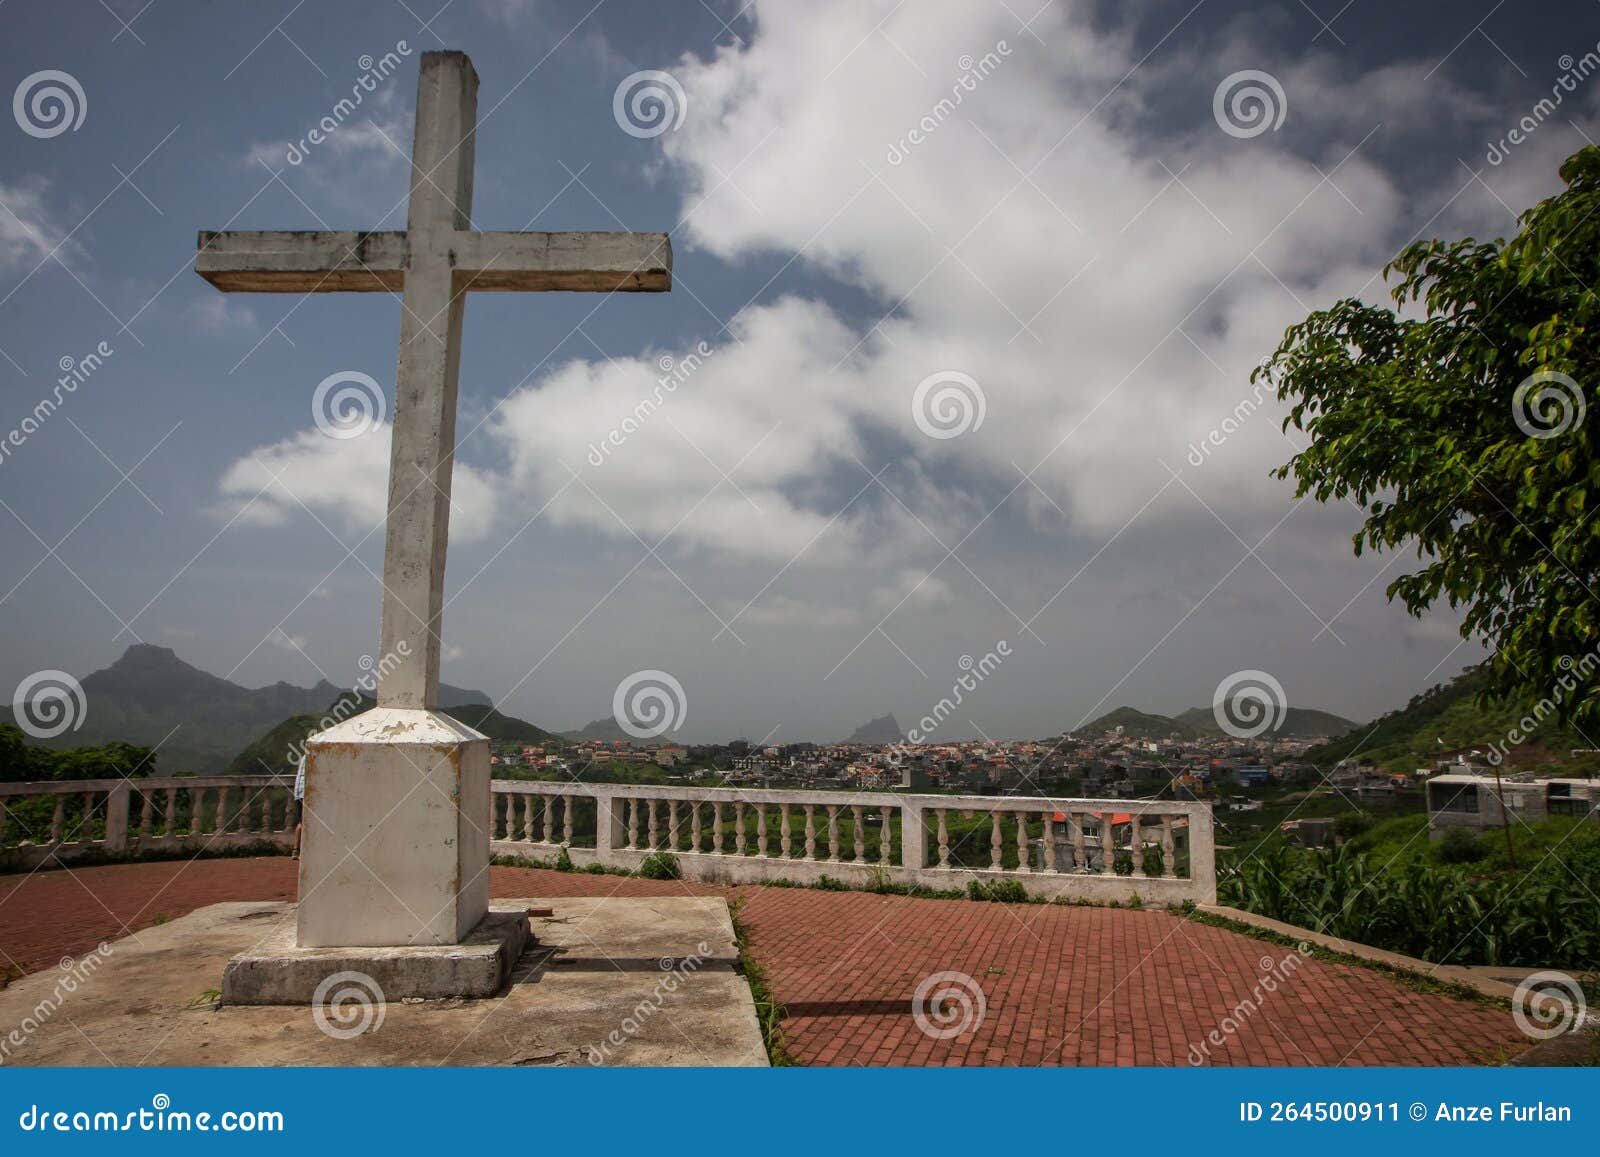 holy cross and mountains with view over the city of assomada on the island of santiago, cabo verde islands